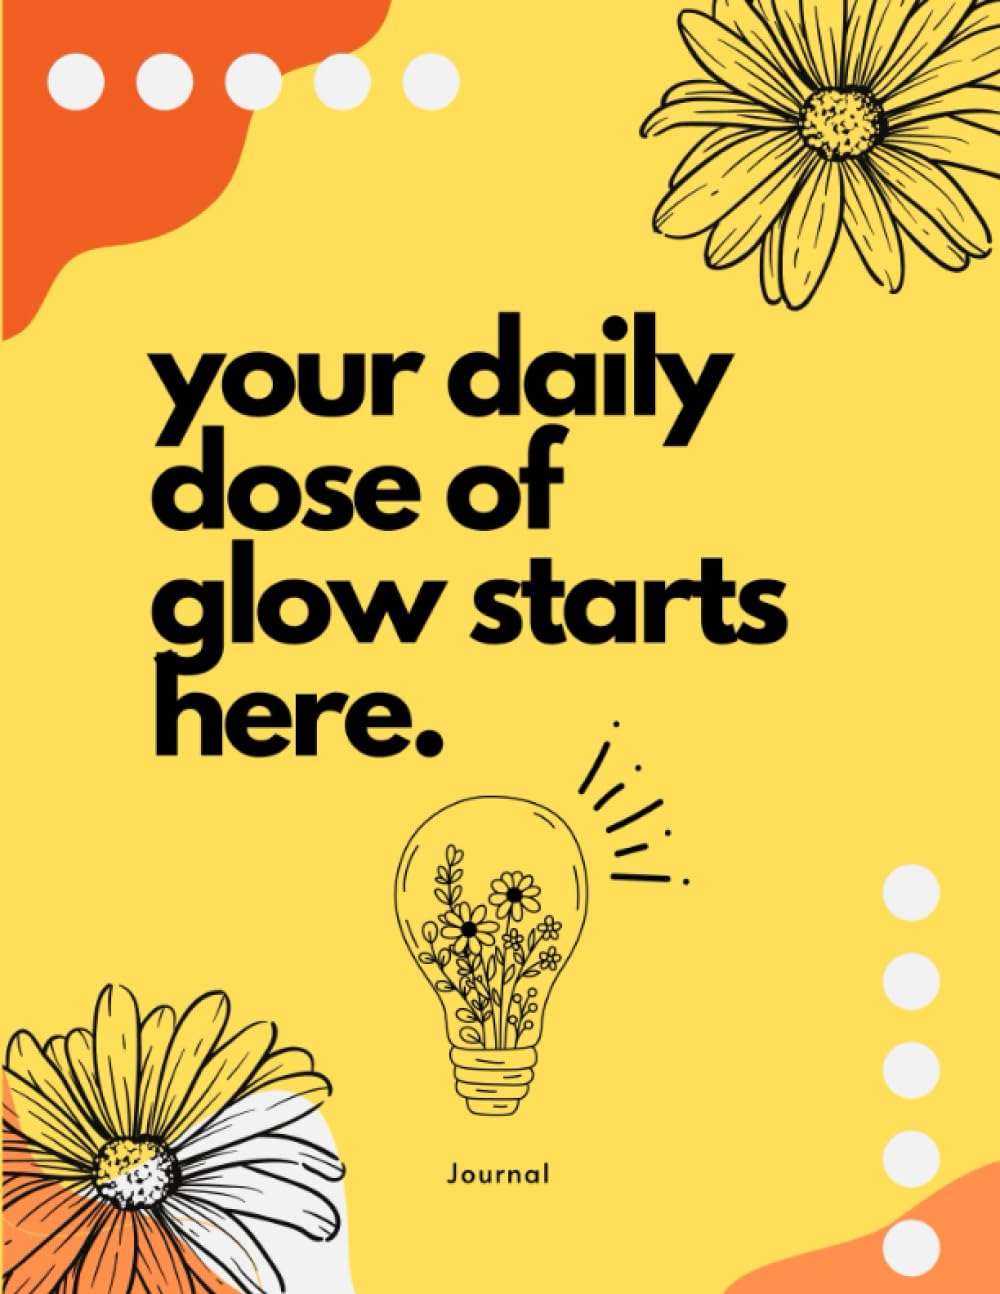 Your Daily Dose of Glow Daily Journal